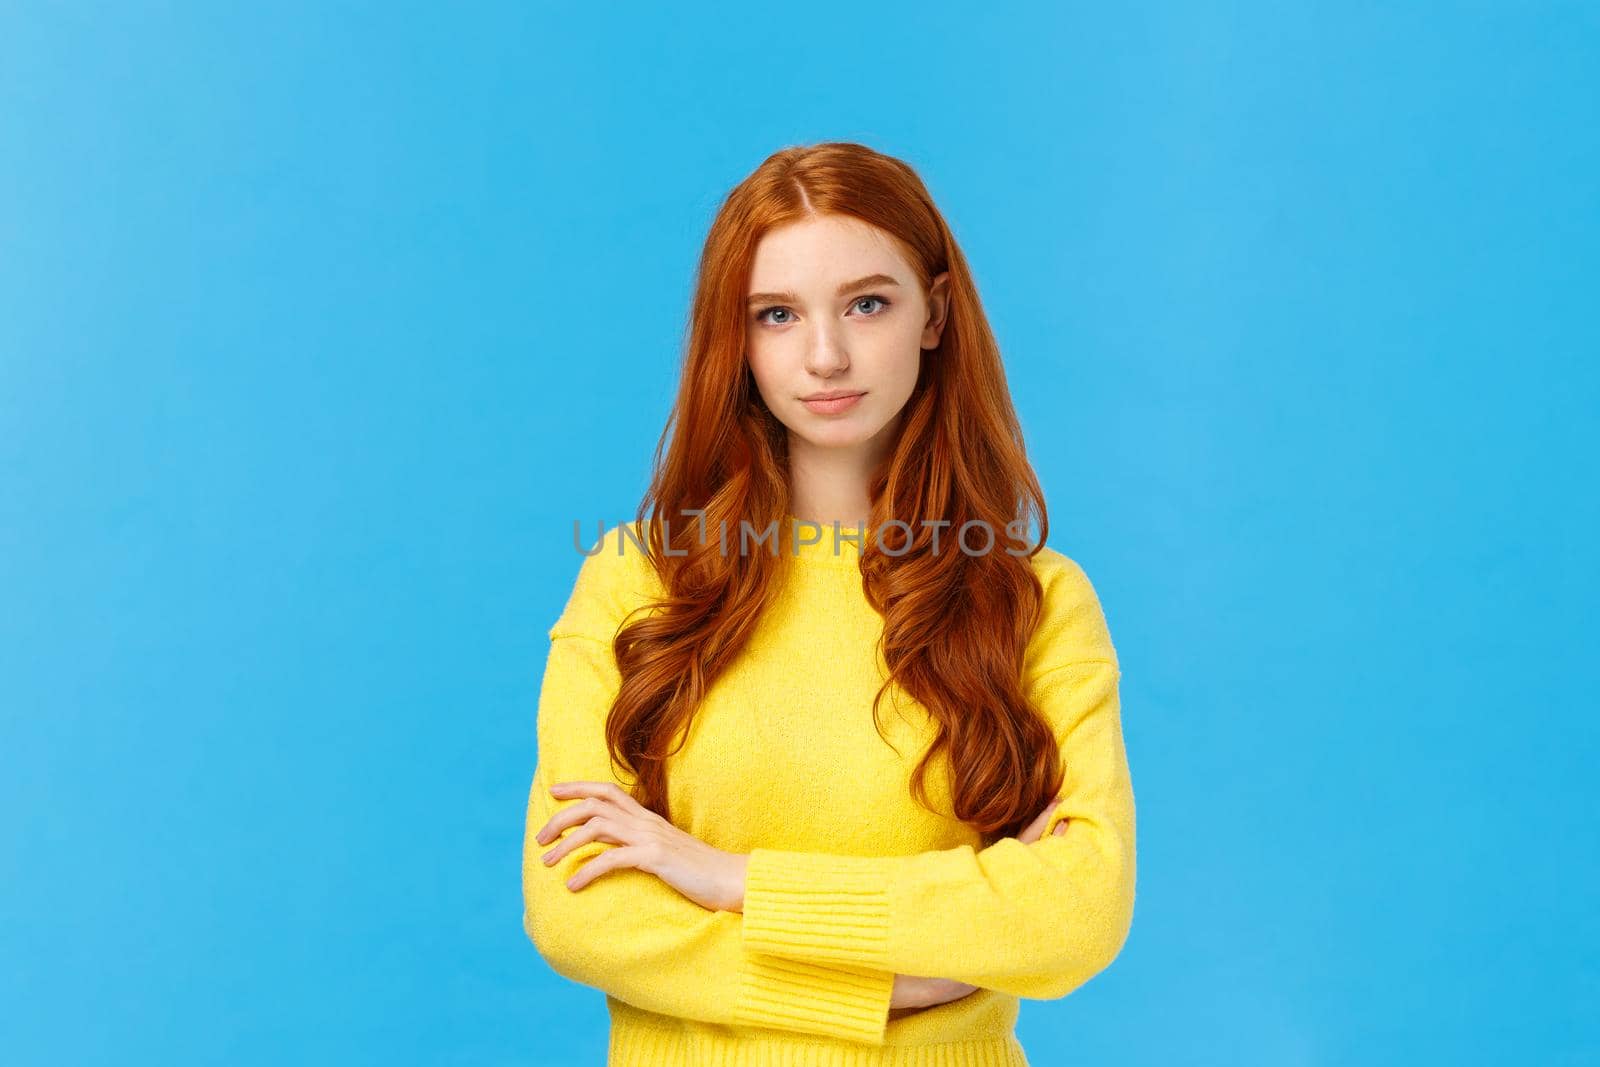 Professionalism, e-commerce and business concept. Serious-looking determined smart gorgeous redhead woman in yellow sweater, cross arms chest confident, looking camera, blue background.